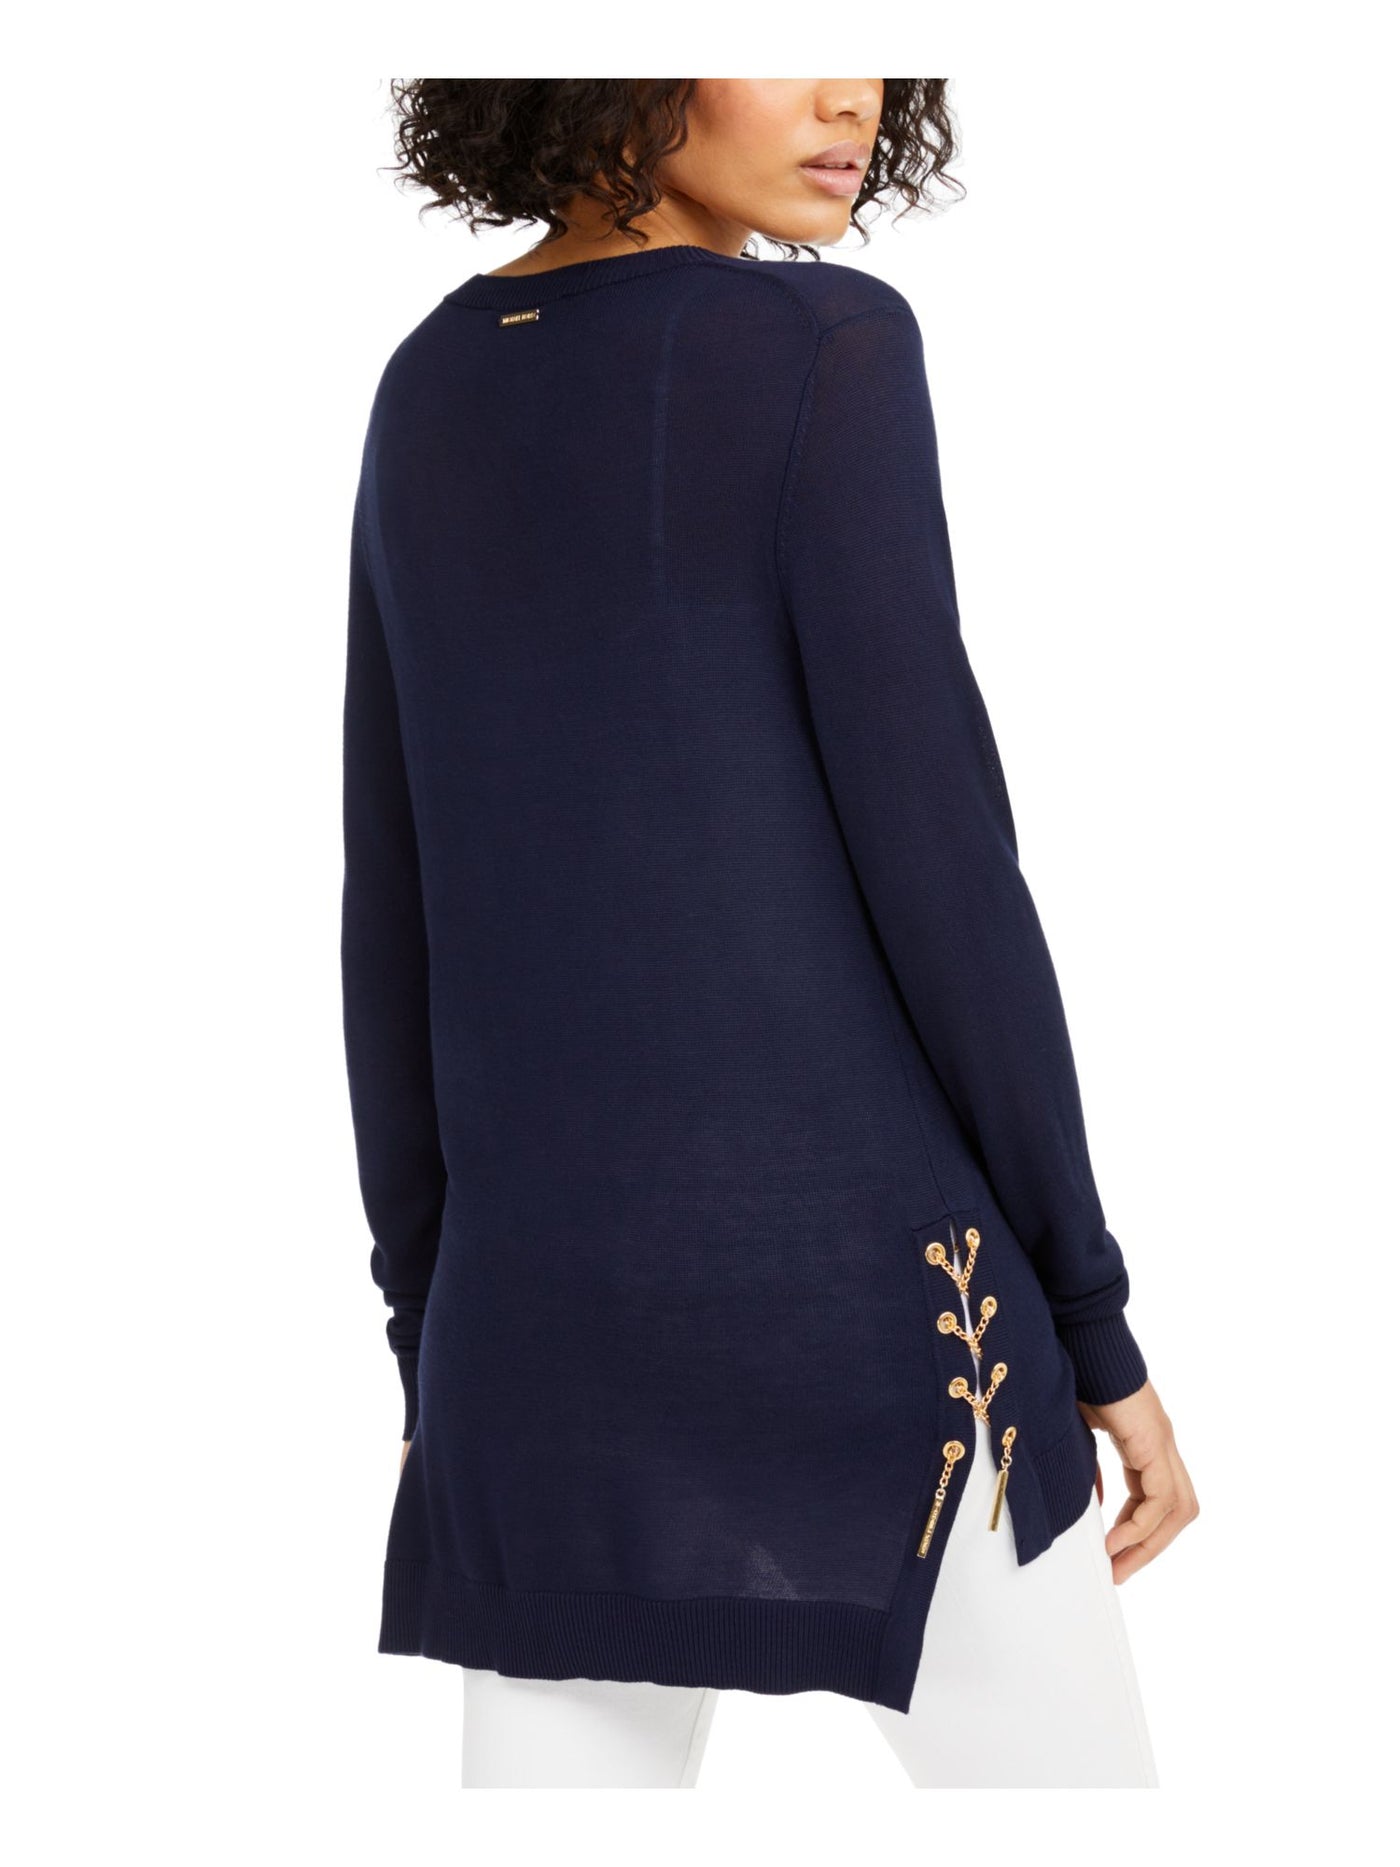 MICHAEL MICHAEL KORS Womens Navy Ribbed Grommets And Lace Up At Hem Long Sleeve Crew Neck Sweater P